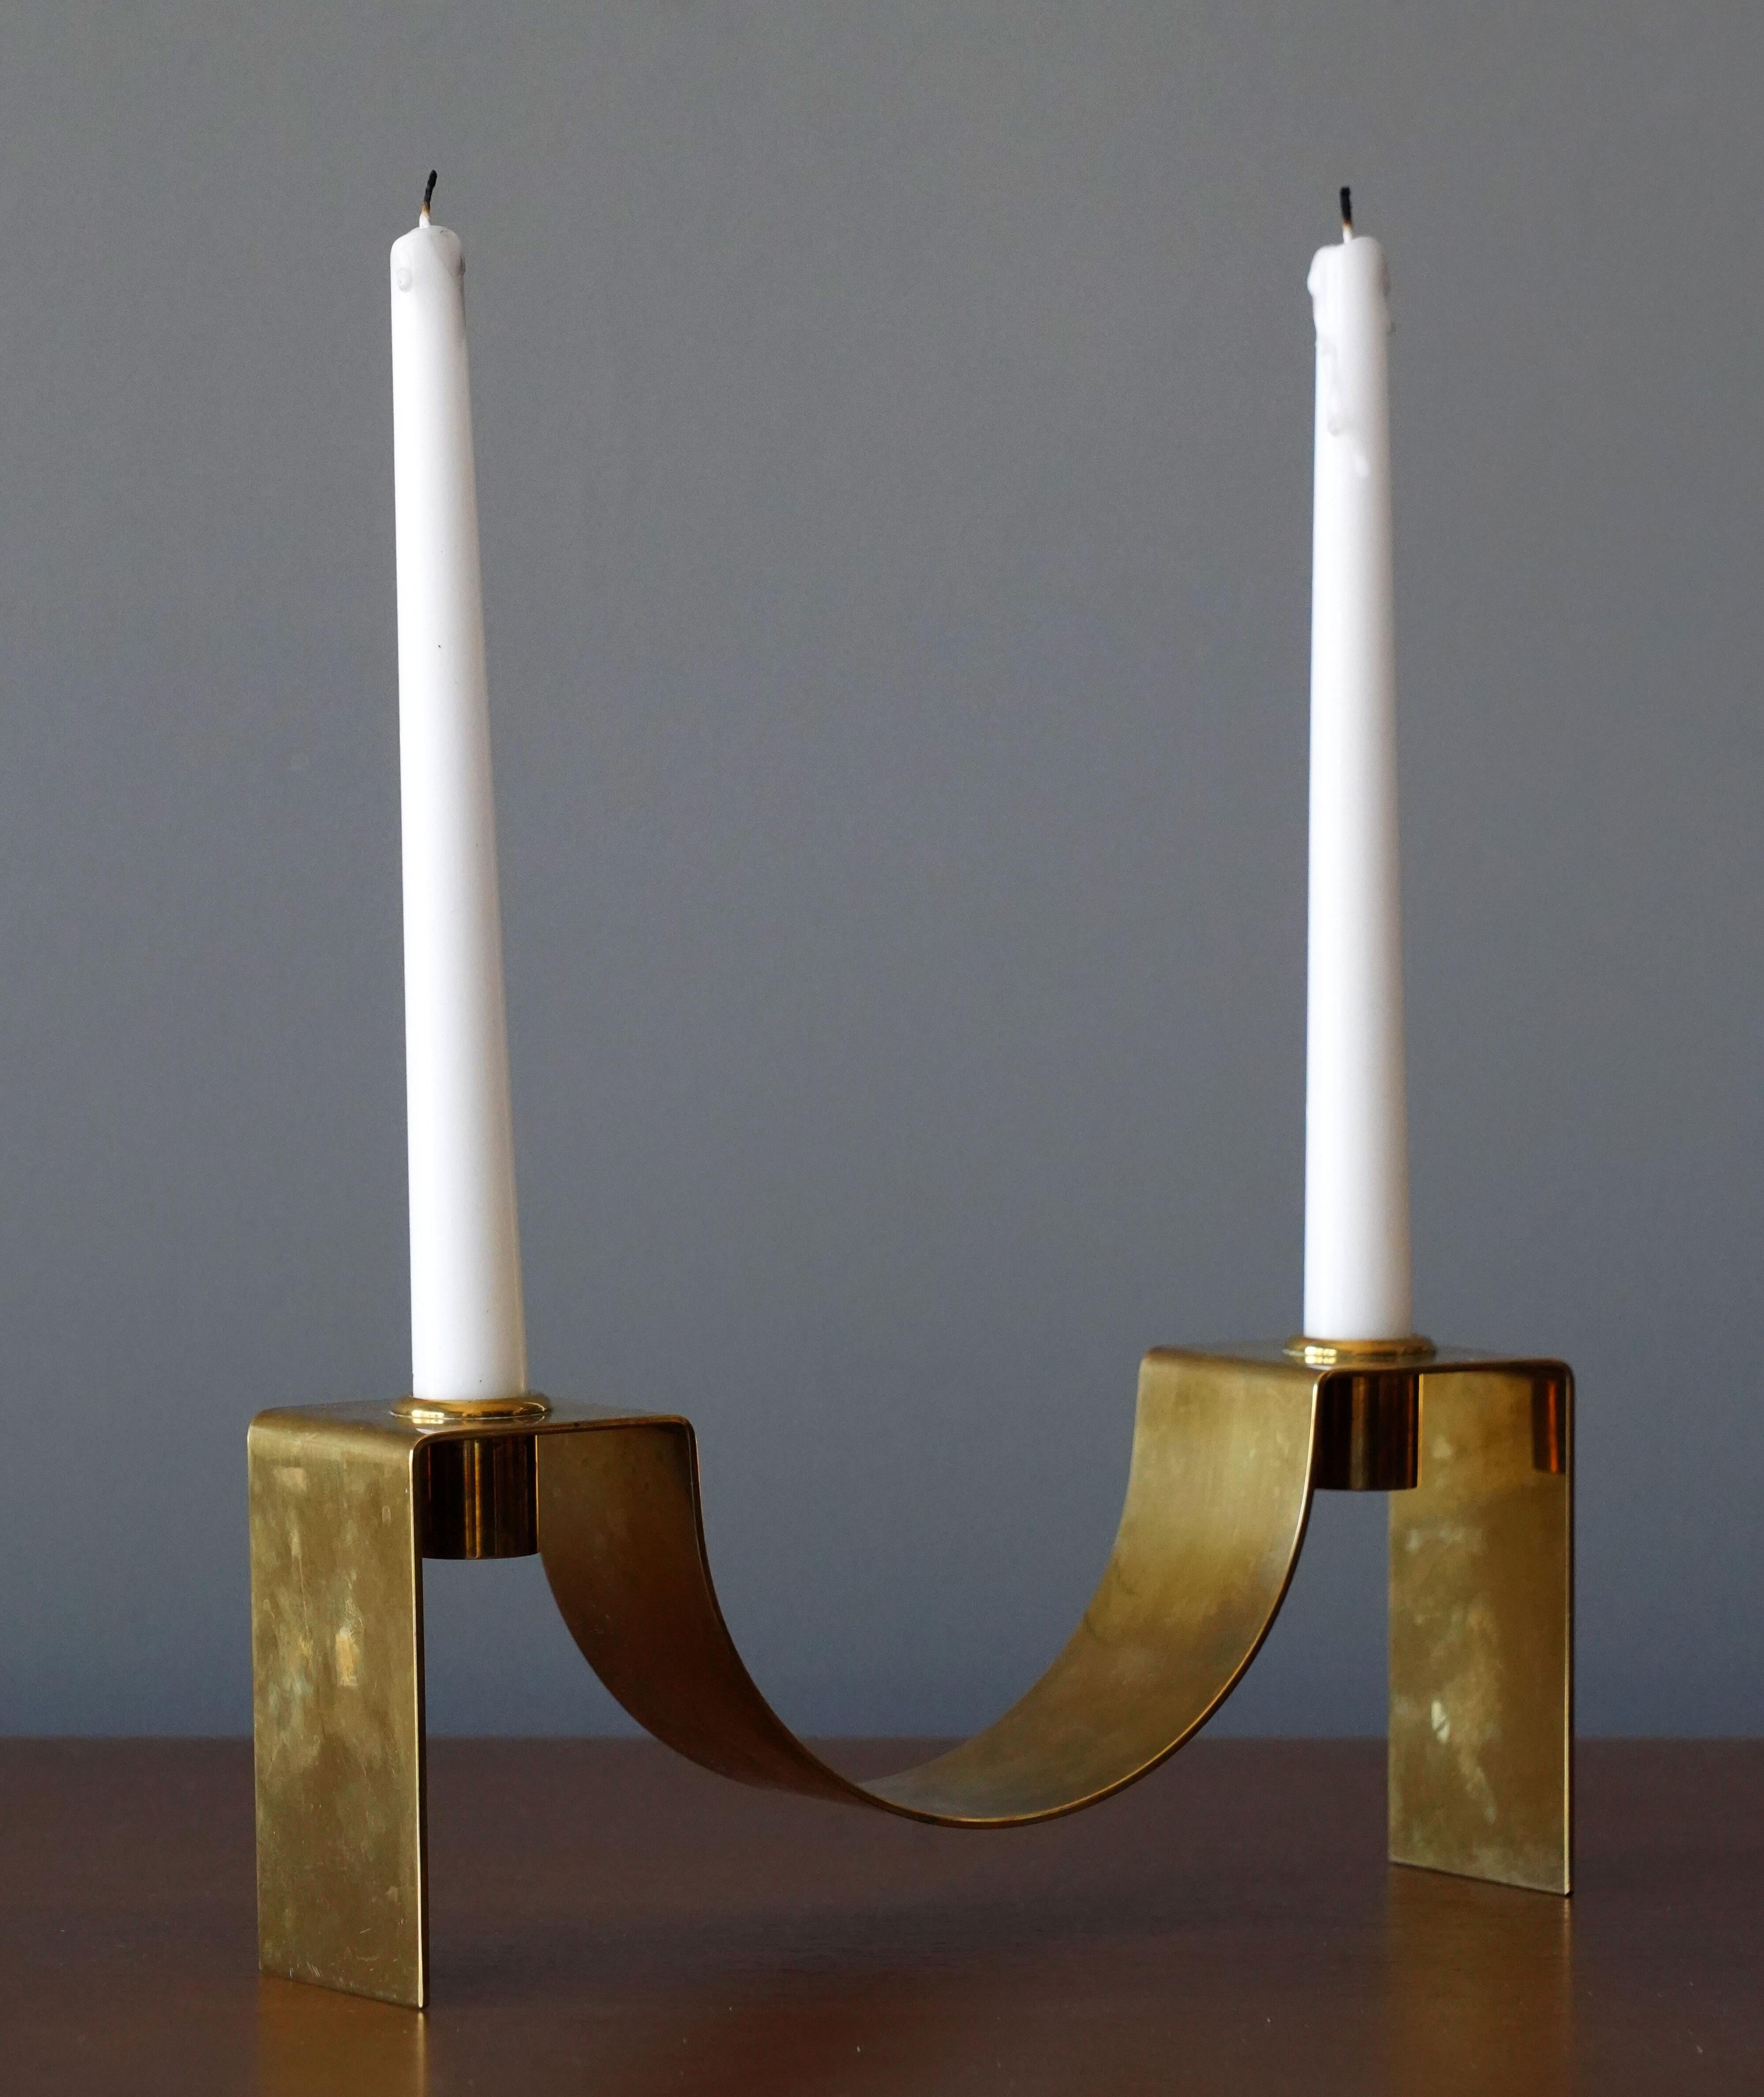 A rare candlestick / candleholder. Designed and produced by Swedish / Finnish silversmith and designer Sigurd Persson (1914-2003).

Other designers of the period include Josef Frank, Estrid Ericsson, Paavo Tynell, Hans-Agne Jacobsen, and Alvar